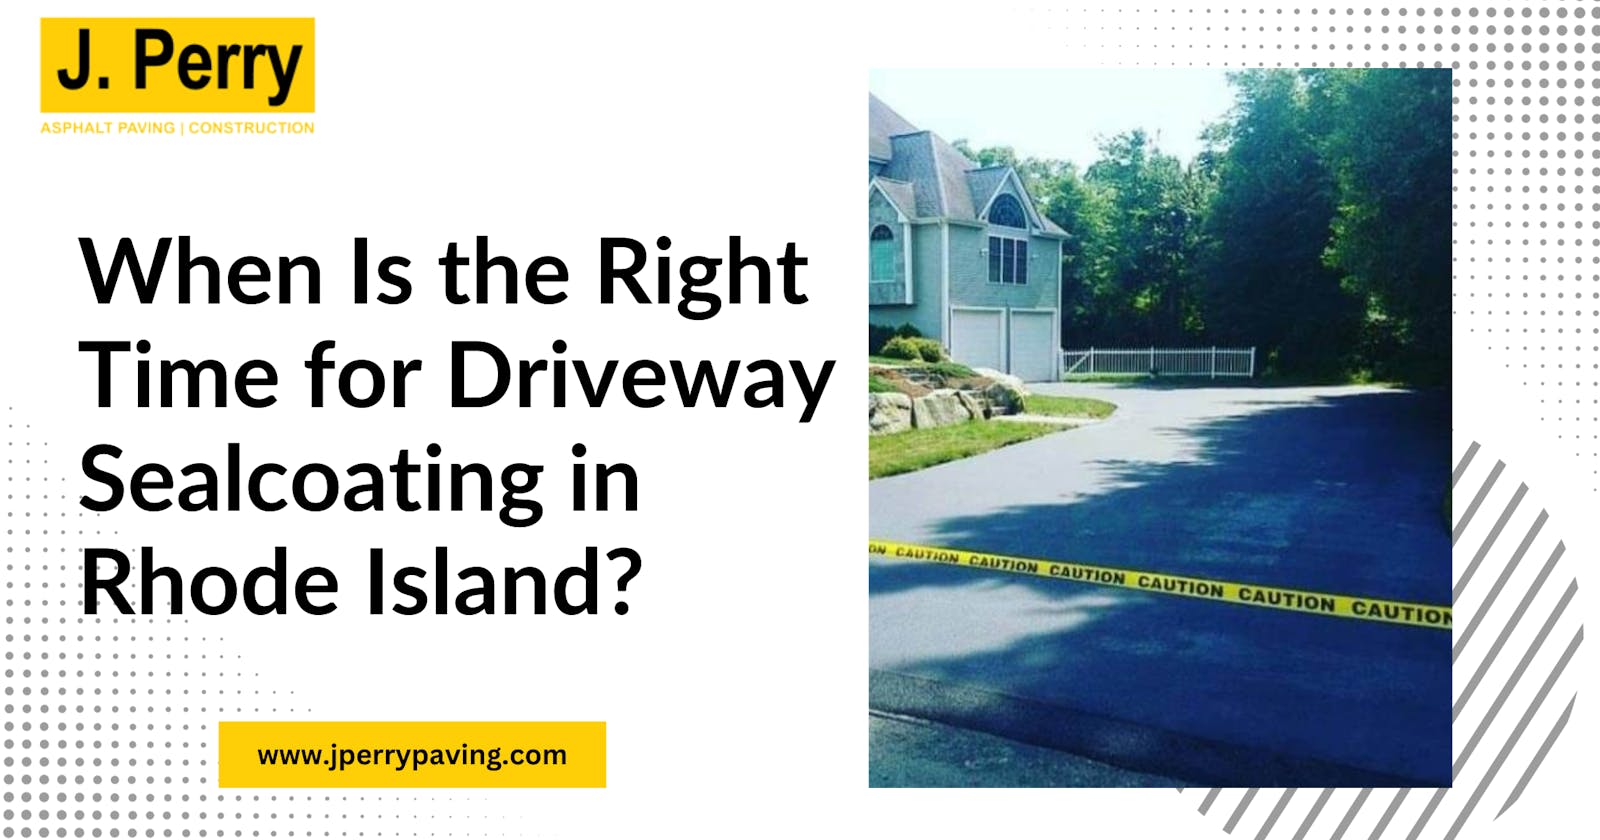 When is the Right Time for Driveway Sealcoating in Rhode Island?